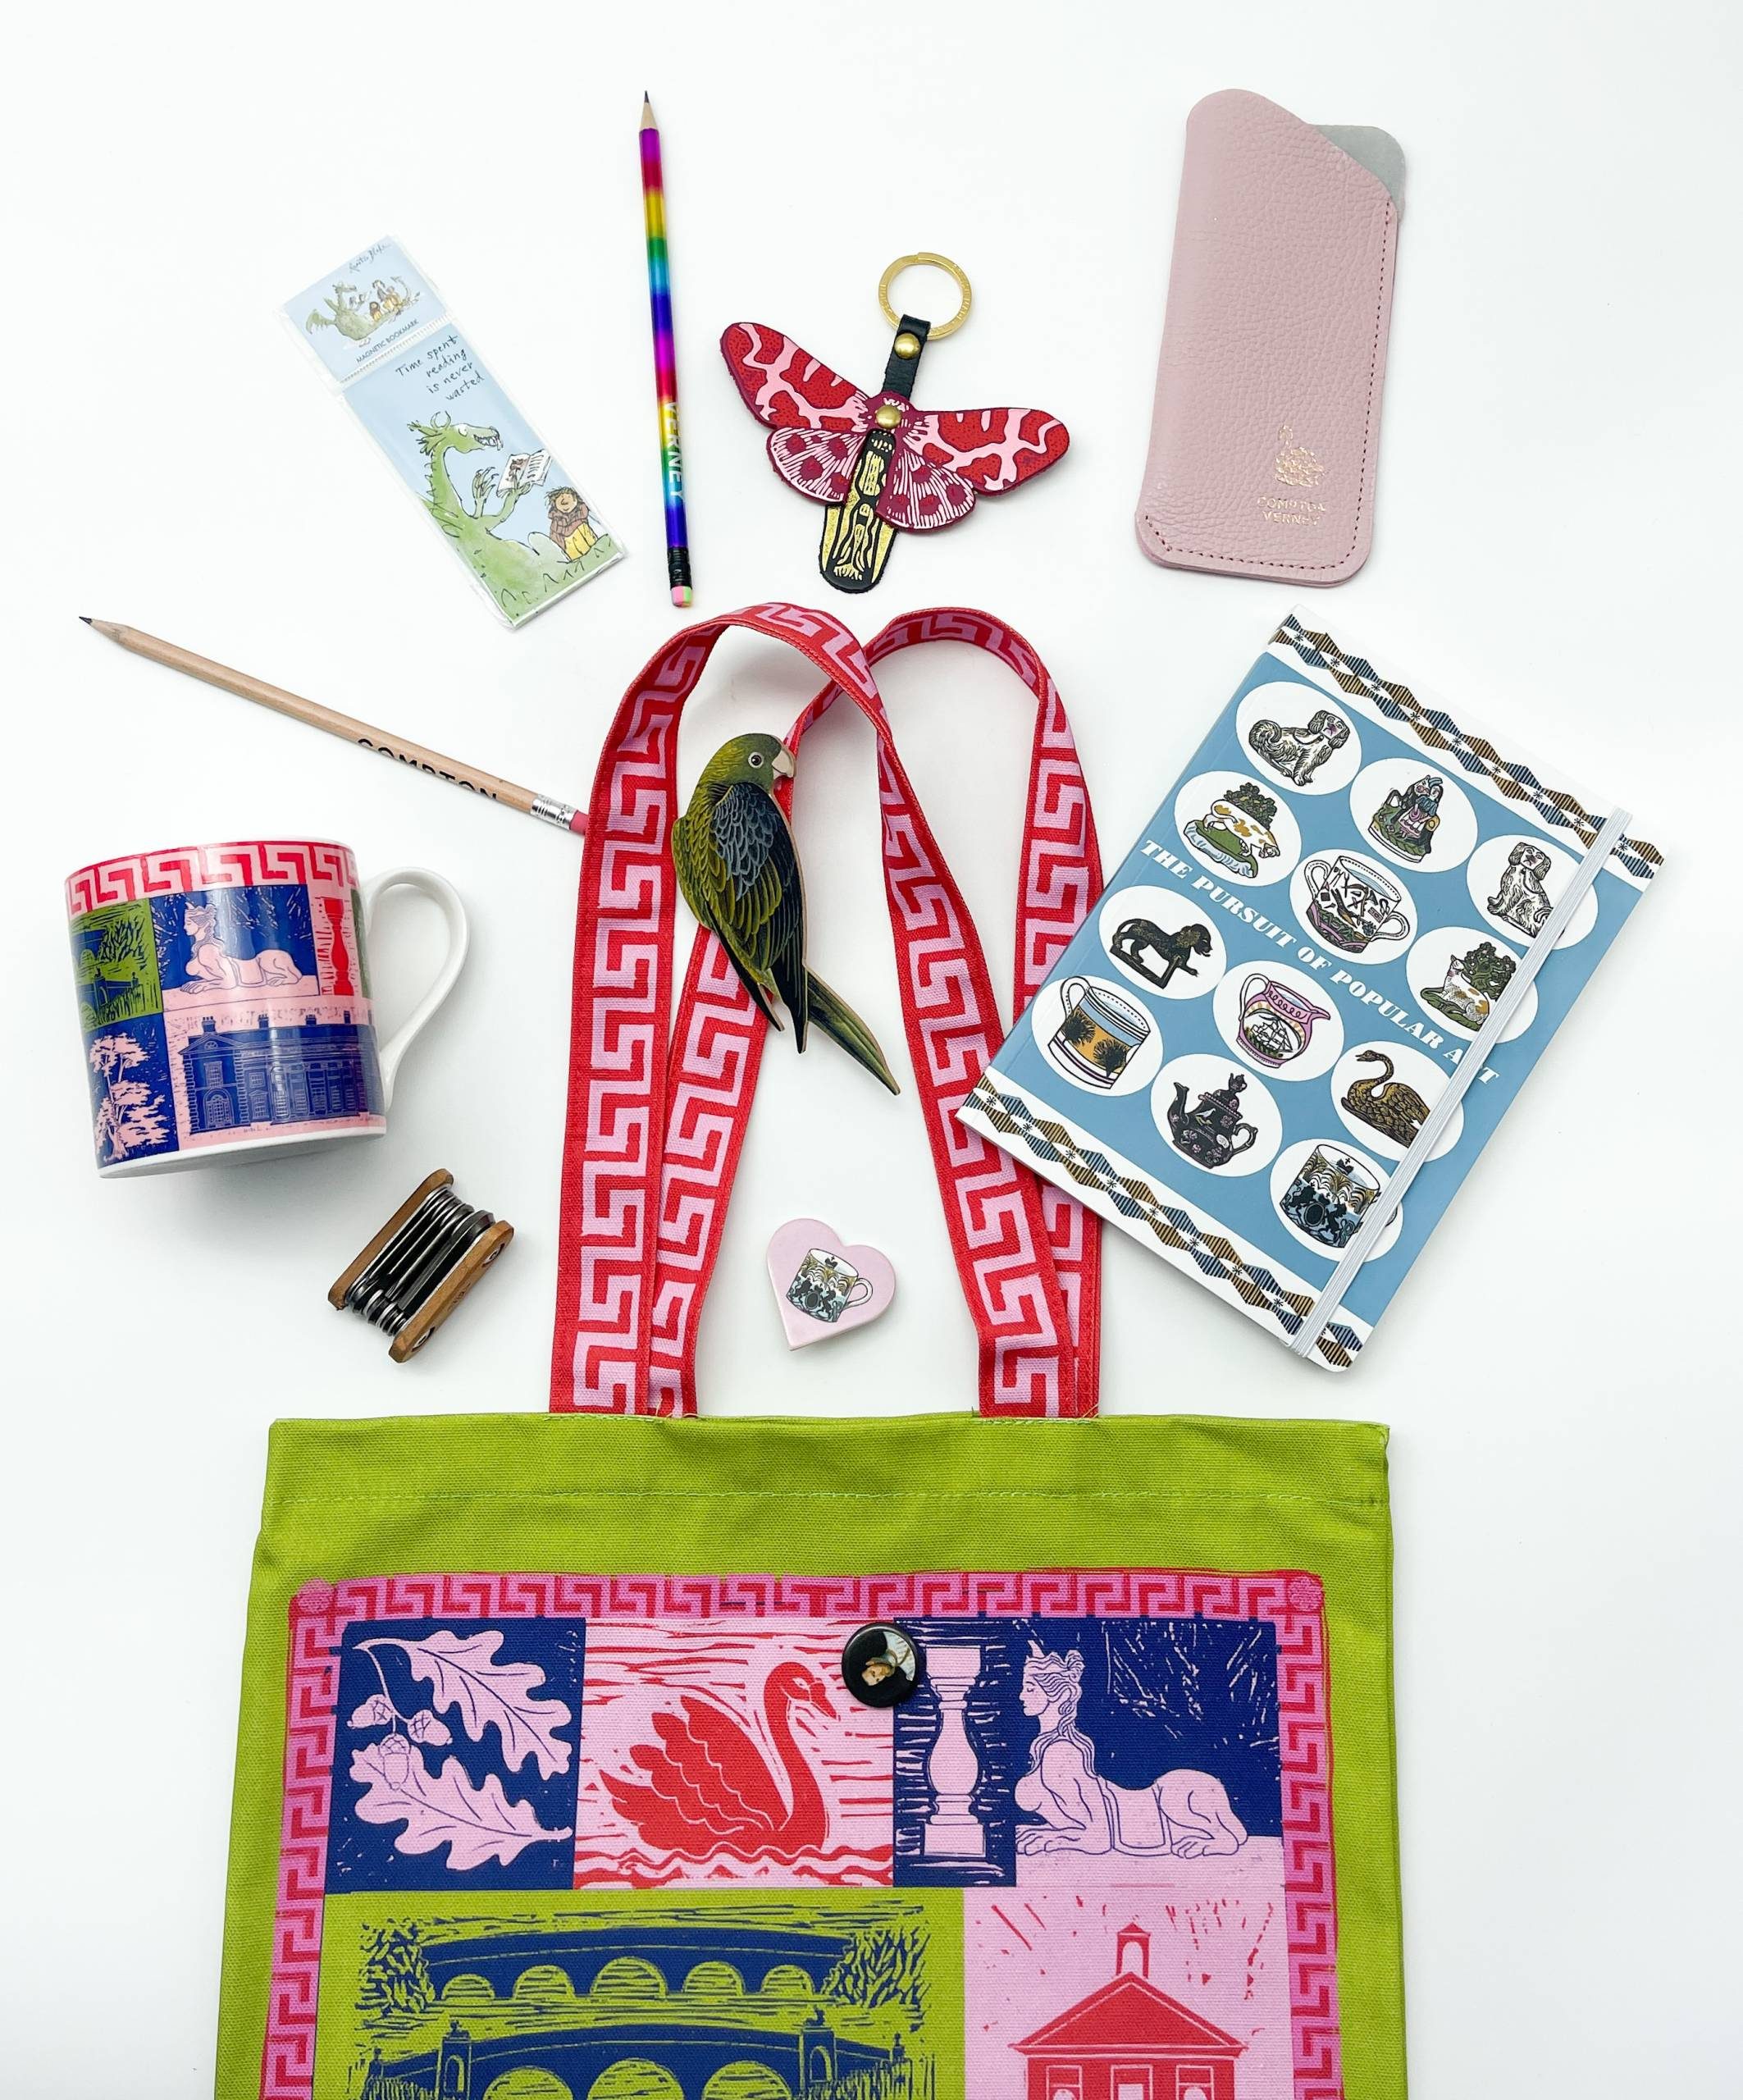 A green, red, and pink tote bag with images of Compton Verney spills open on a white background with Compton Verney gift shop items including a pink glasses case, colourful mug, a bookmark.